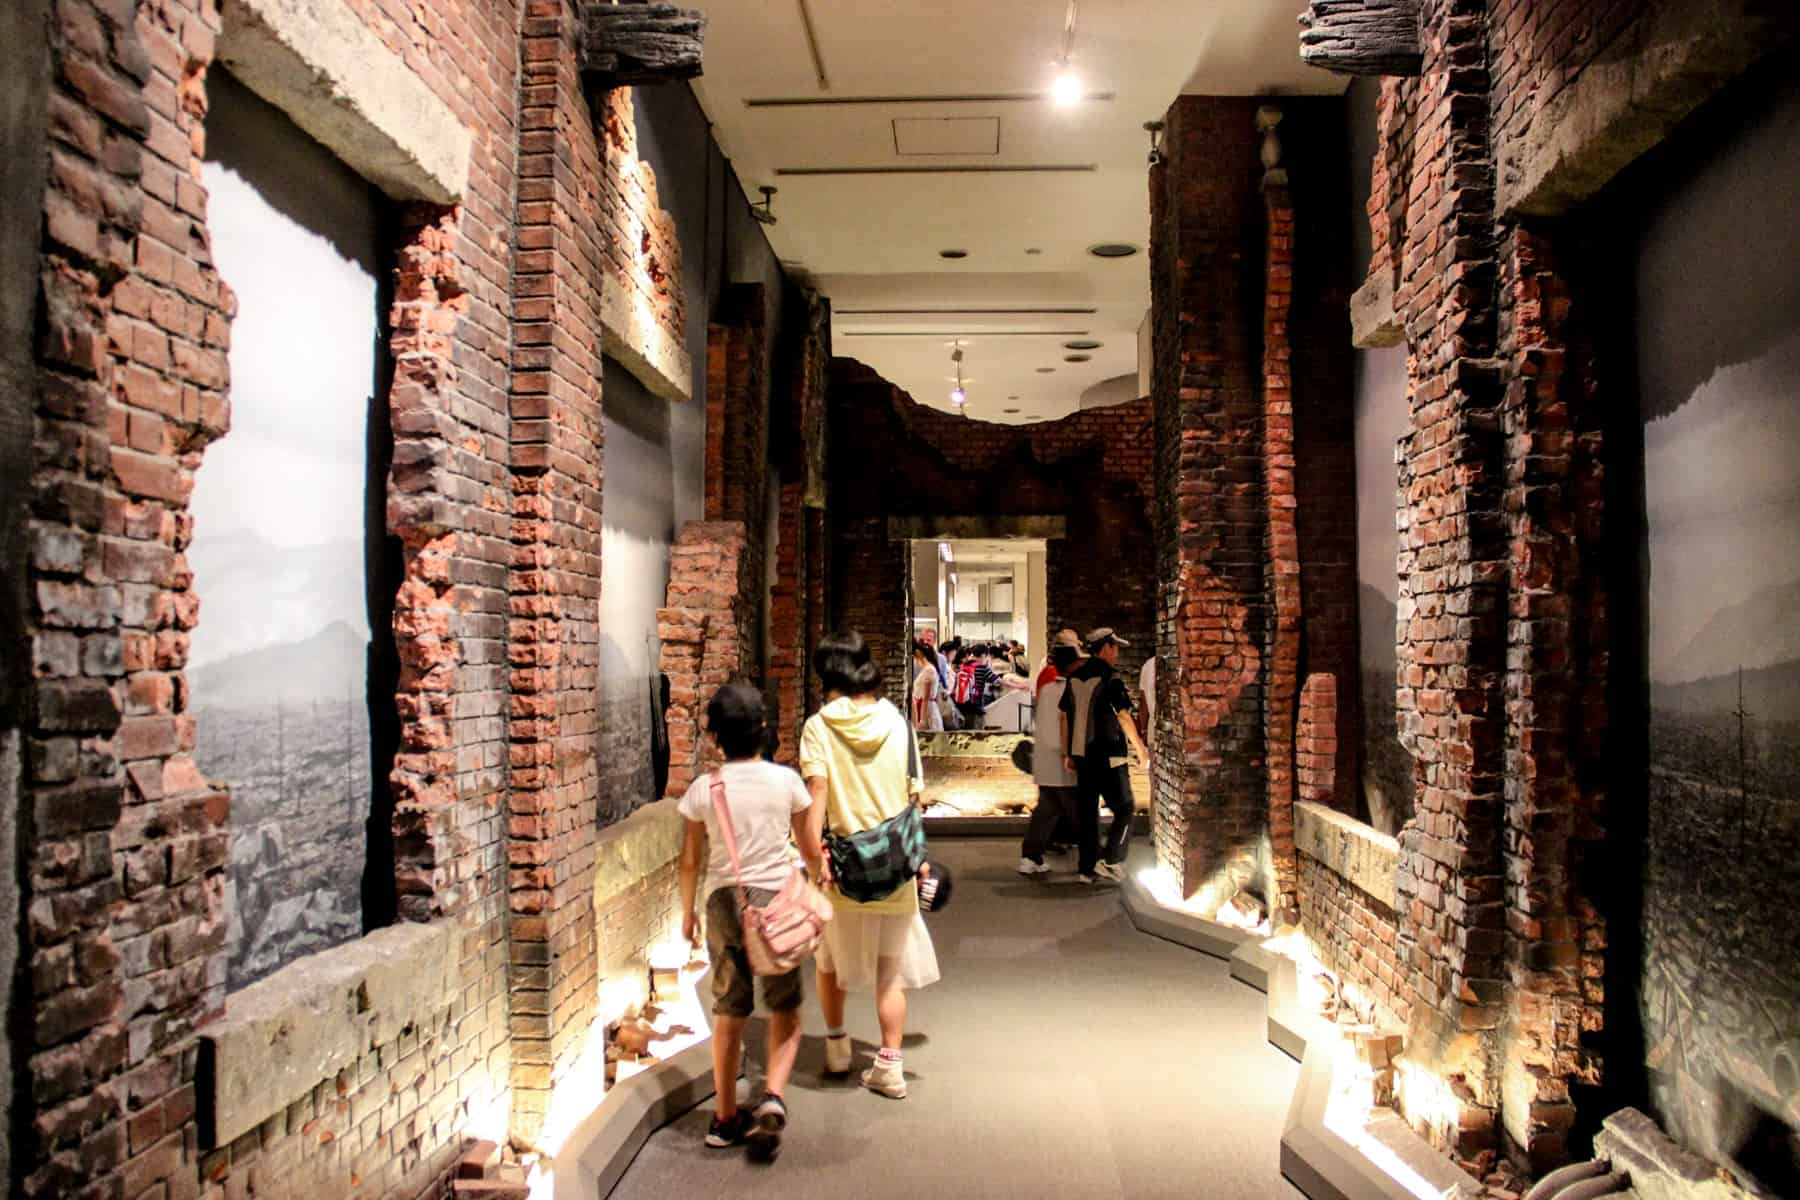 An exhibit inside Hiroshima Peace Memorial Museum showing crumbling brick walls and black and white images. 